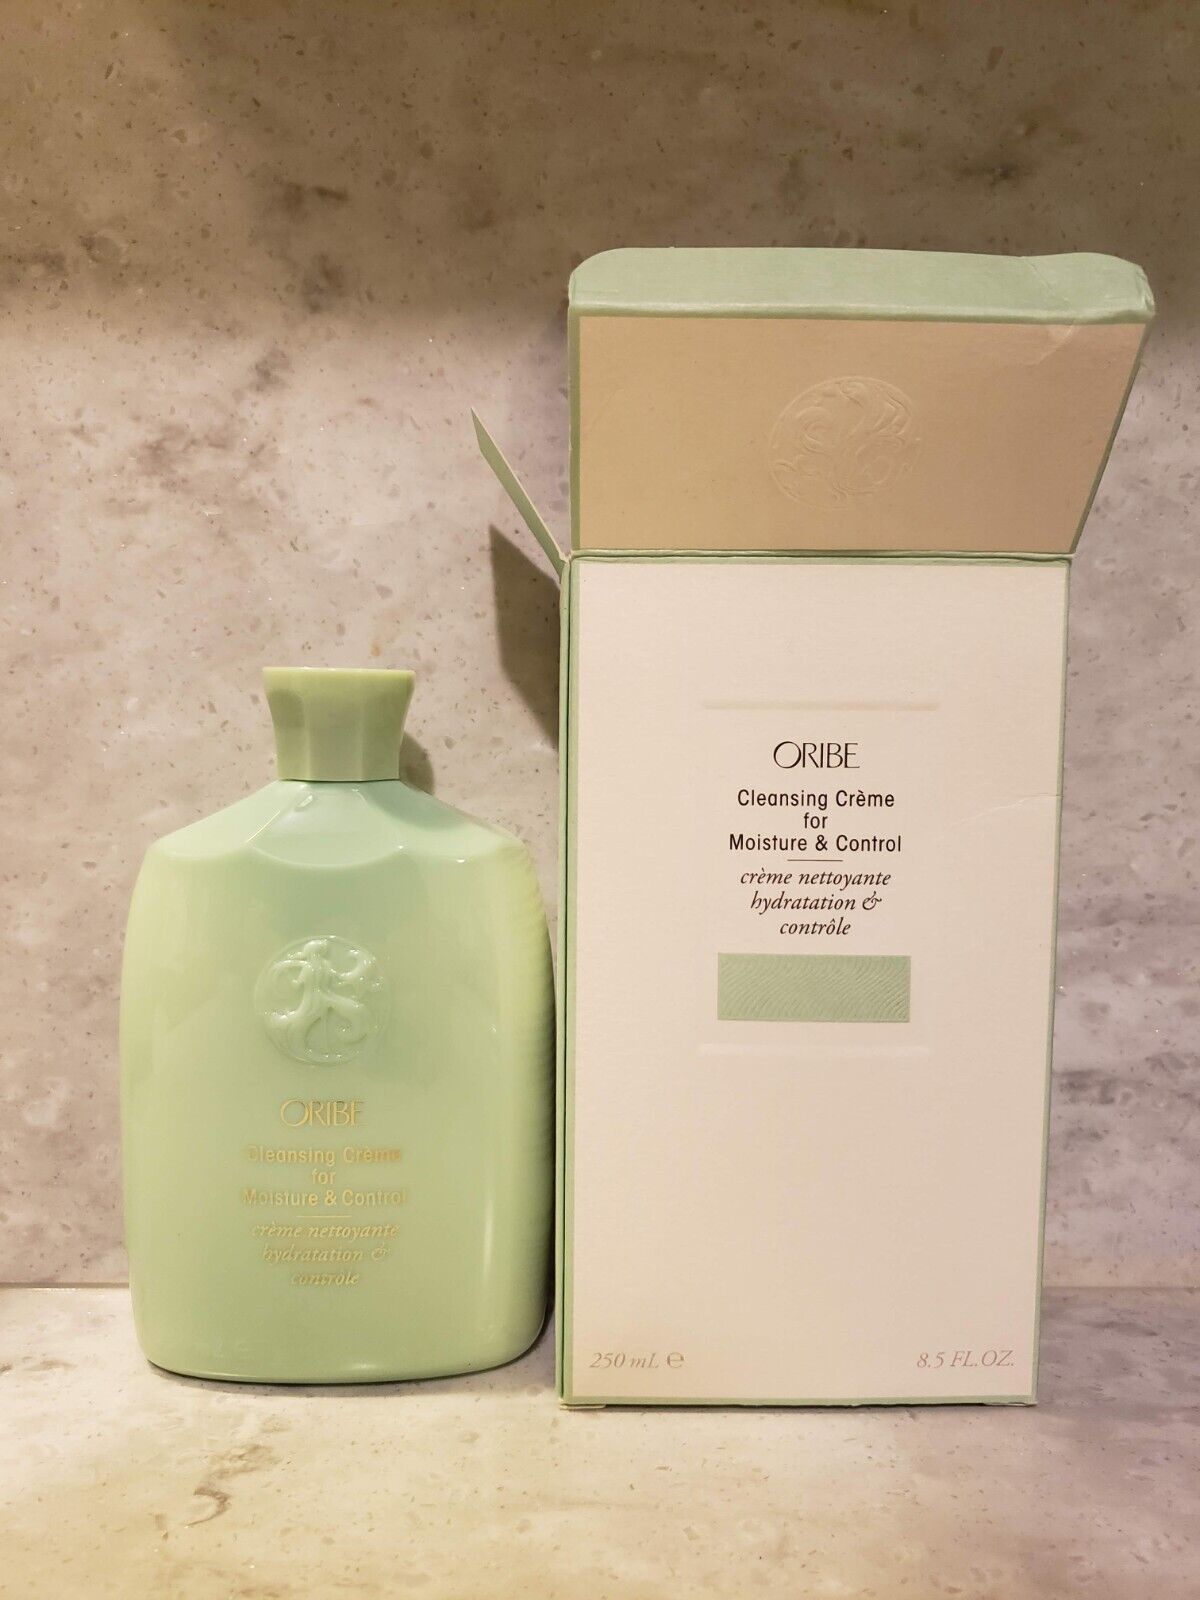 Oribe Cleansing Creme For Moisture And Control Shampoo 8.5 oz New Imperfect Box - $35.63